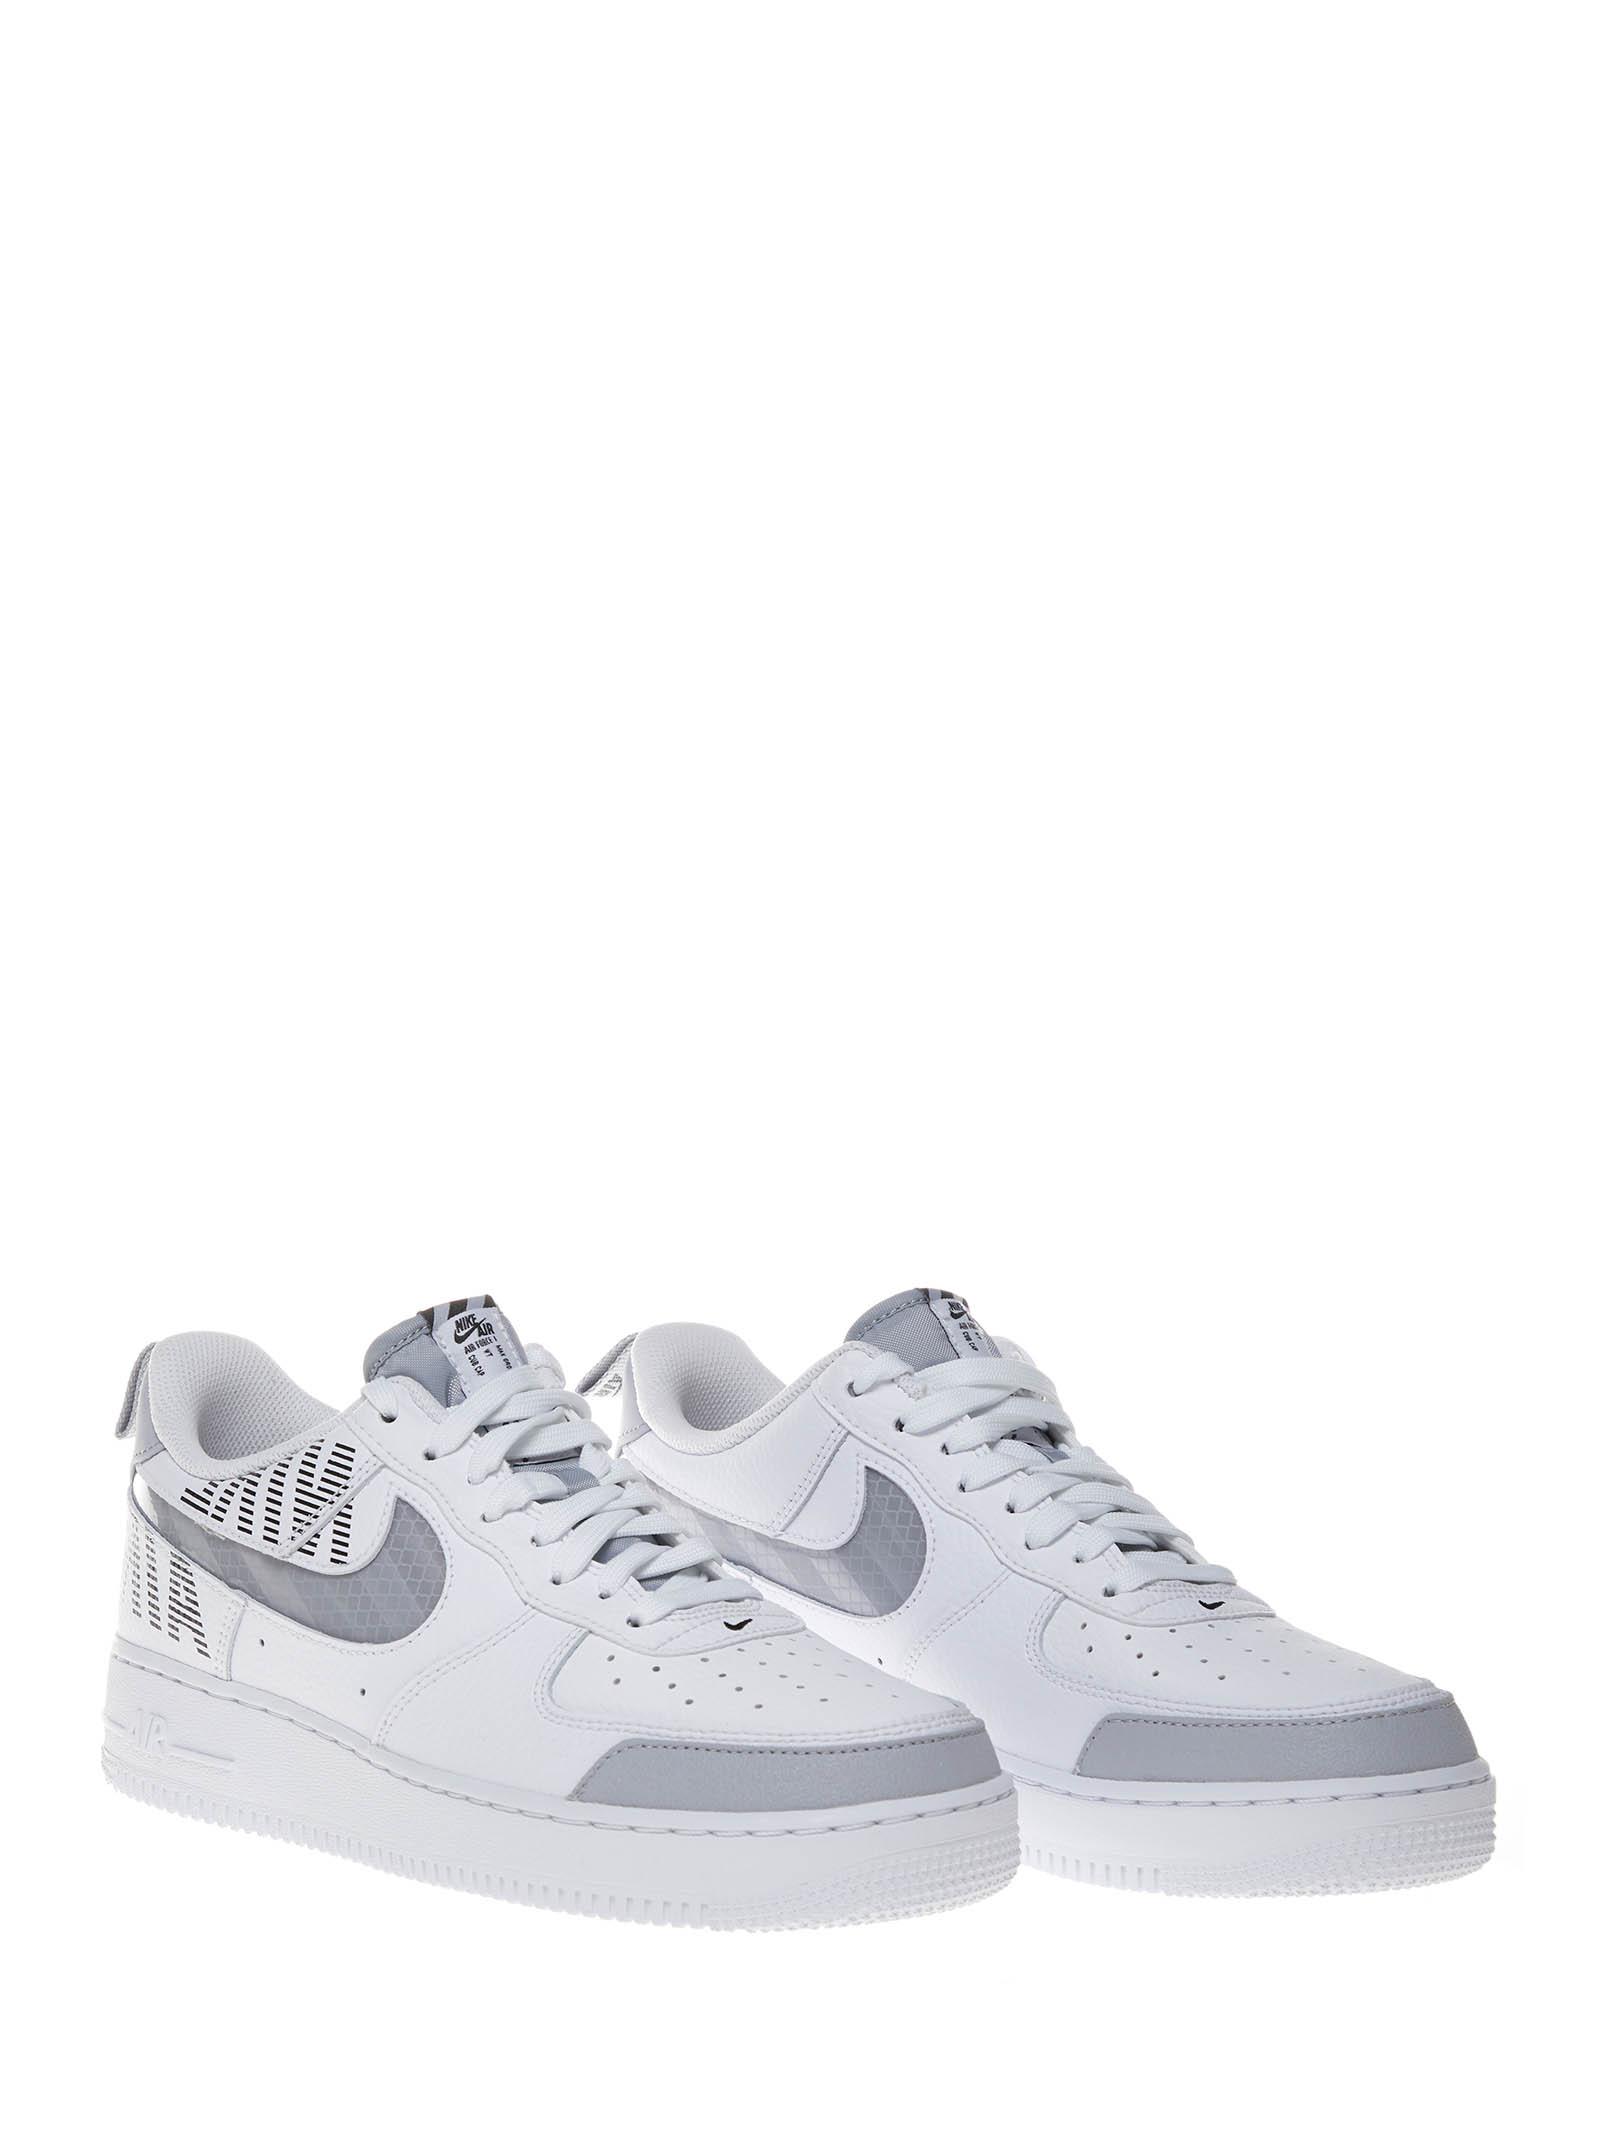 Nike Air Force 1 Low Reflective Swoosh for Sale